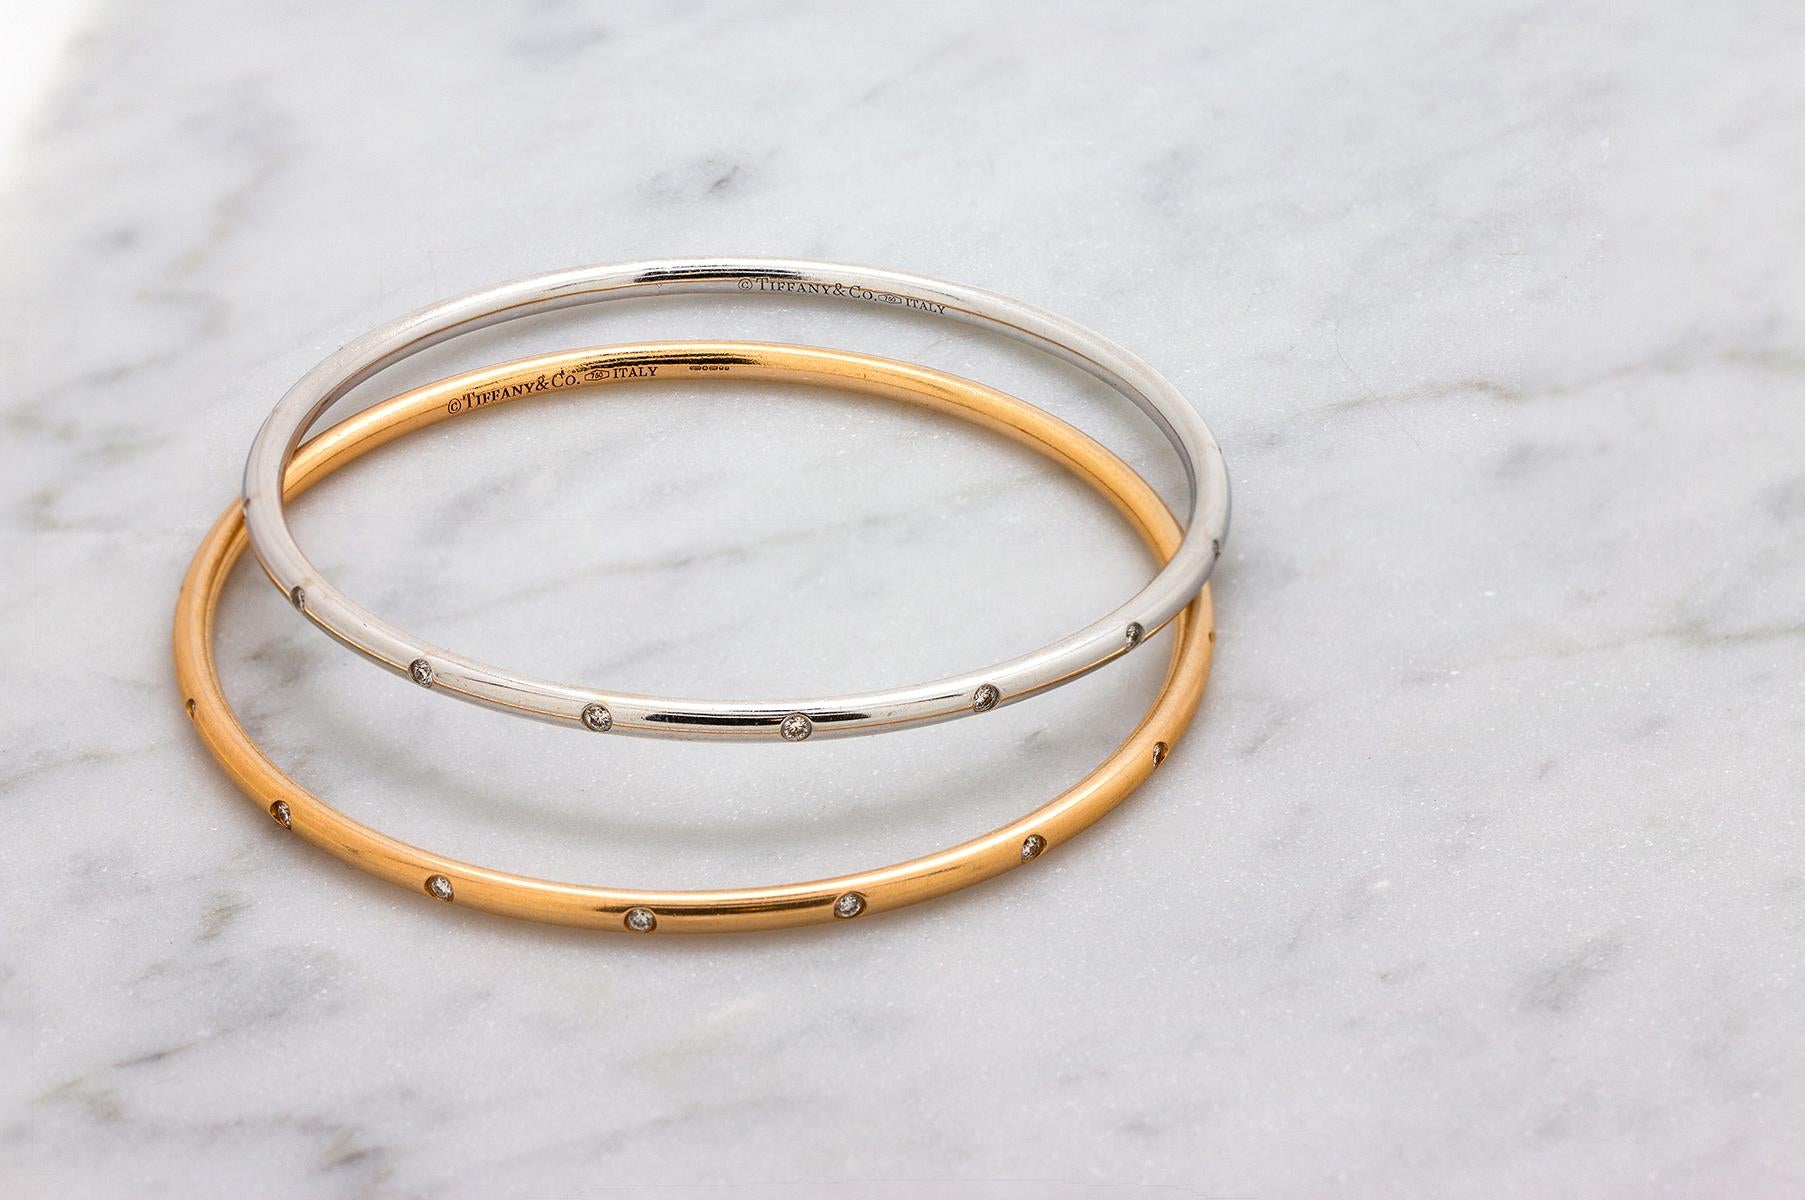 Classic, versatile 3mm Tiffany & Co. Bezet bangle bracelet in 18k rose gold with 16 flush-set full-cut round brilliant diamonds, total weigh approximately 0.48ct, F-G/VS. This stunning bracelet is great for stacking or wearing solo, with jeans or a